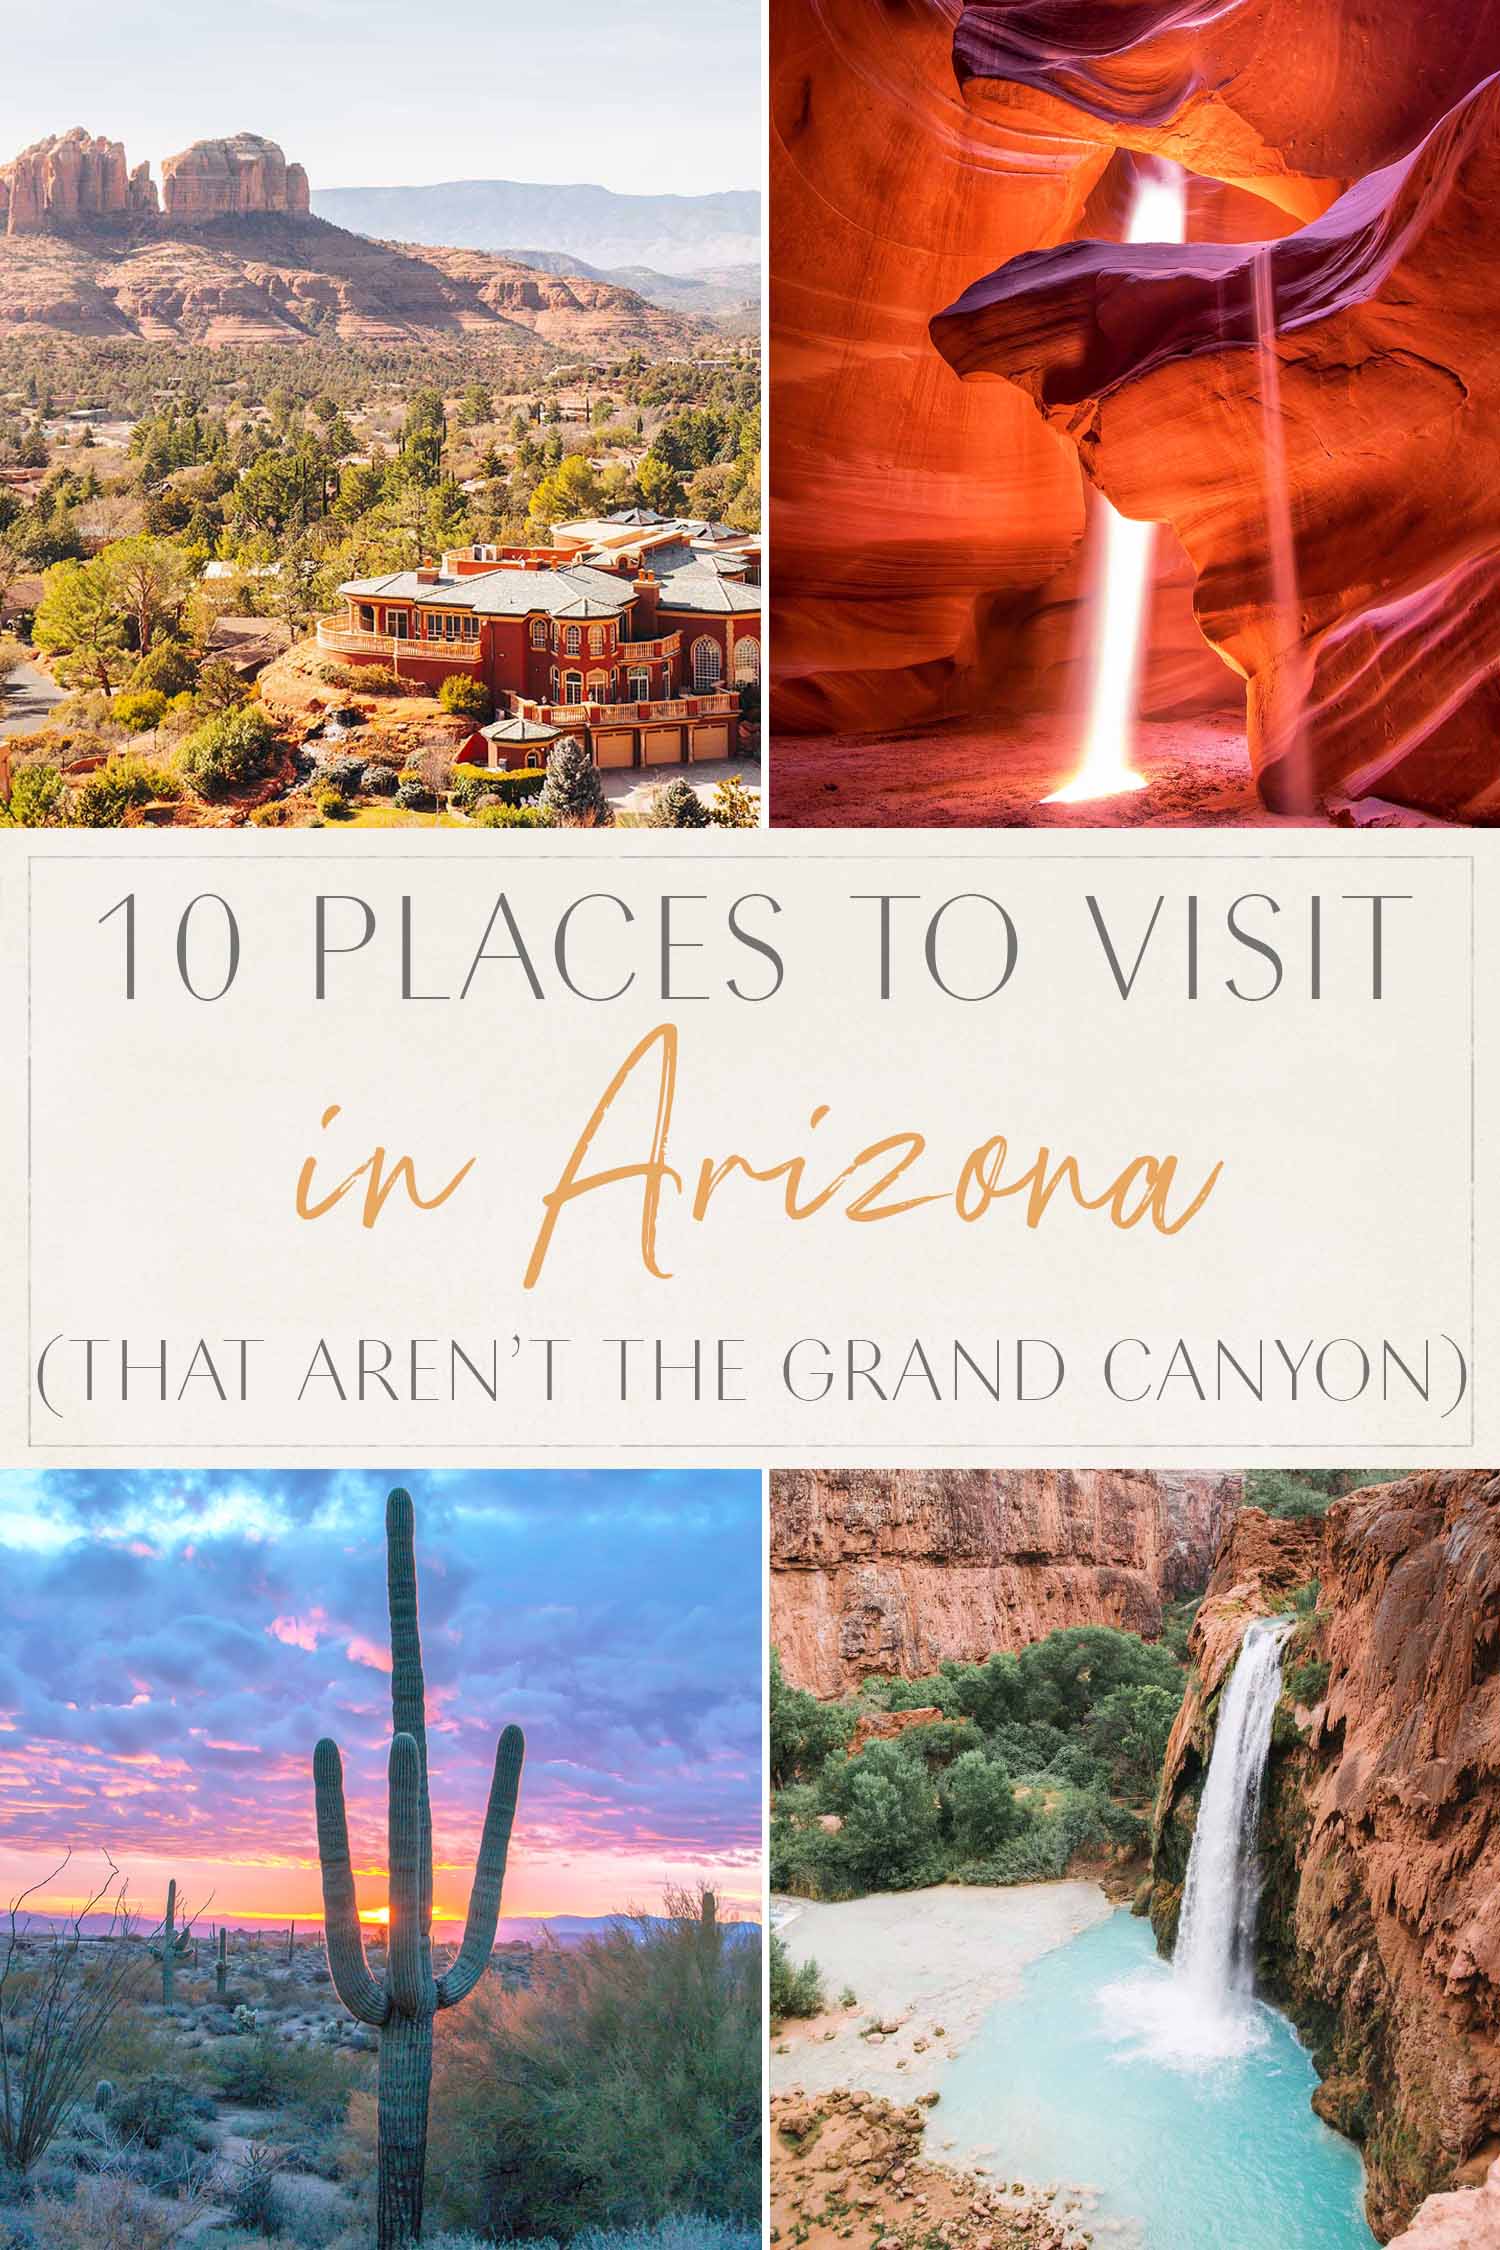 10 Places to Visit in Arizona Not Grand Canyon